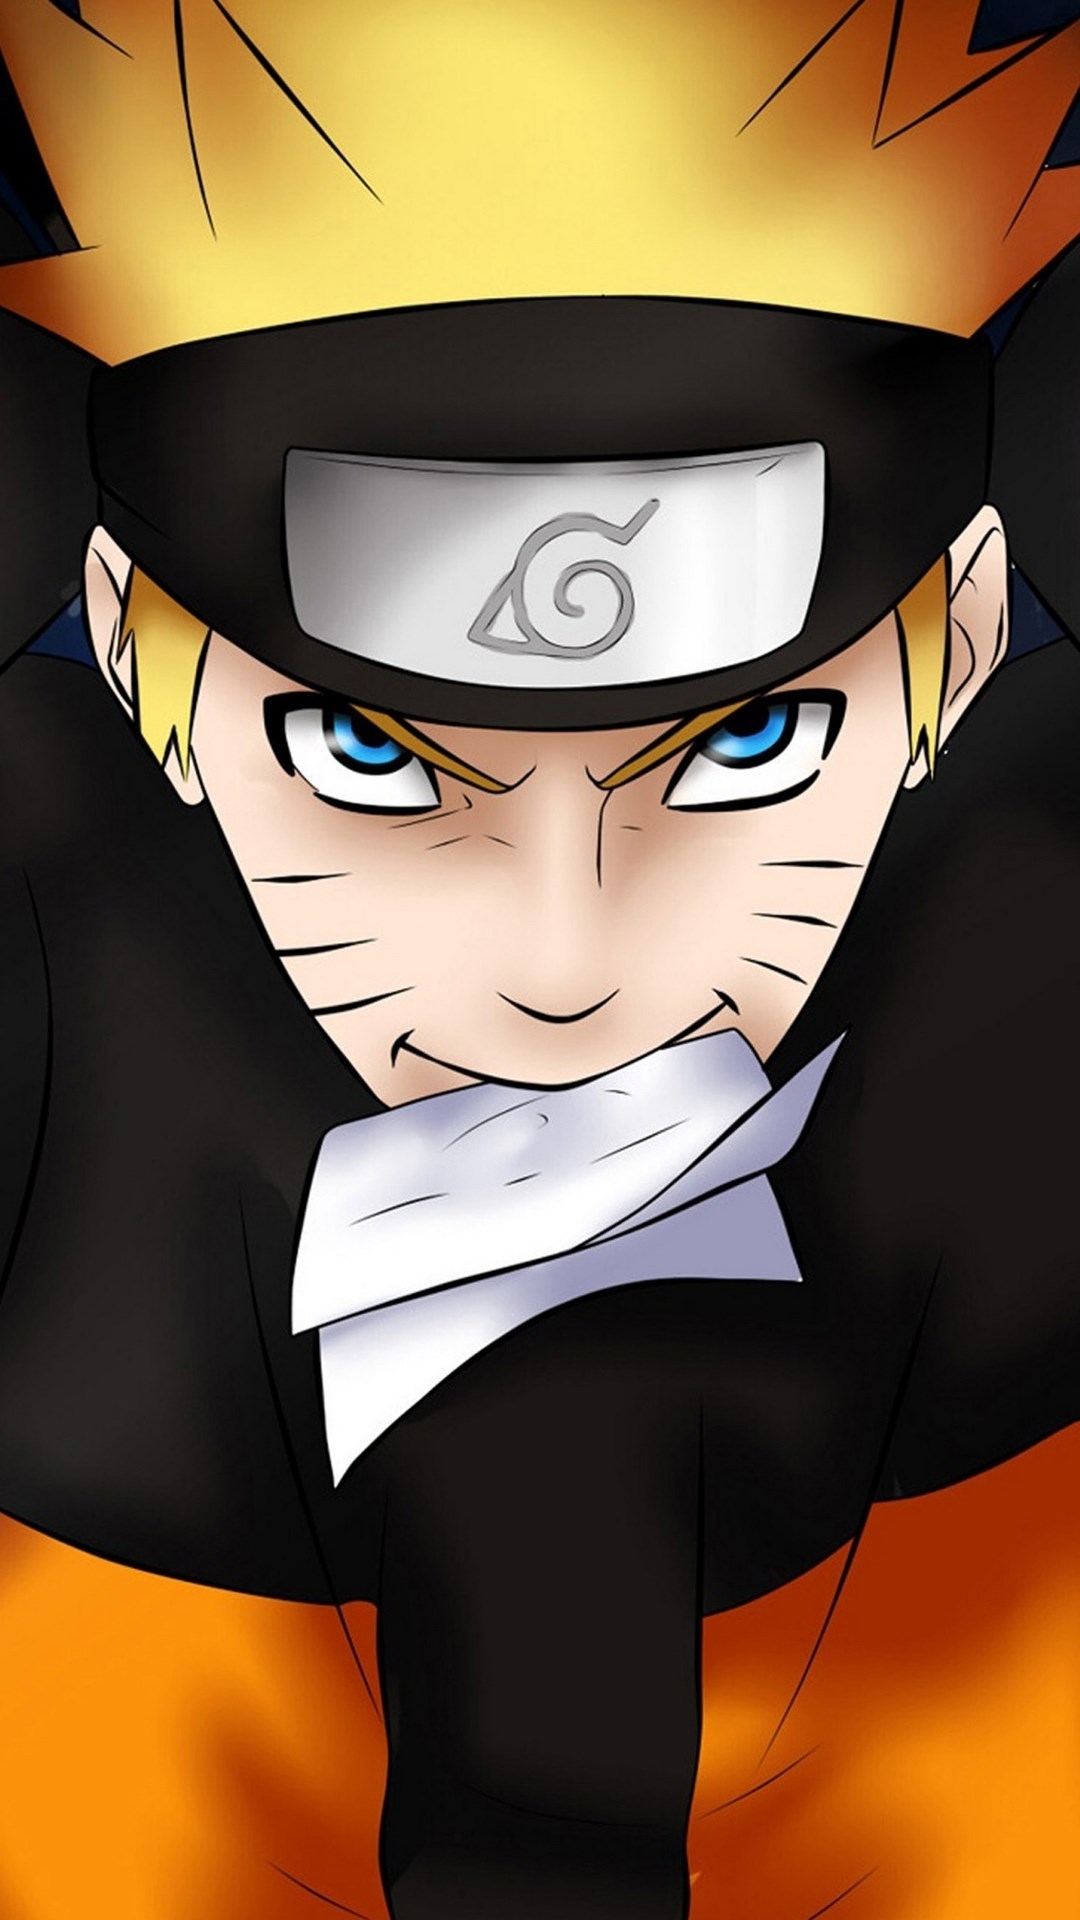 most popular wallpaper for android,cartoon,anime,naruto,fictional character,illustration